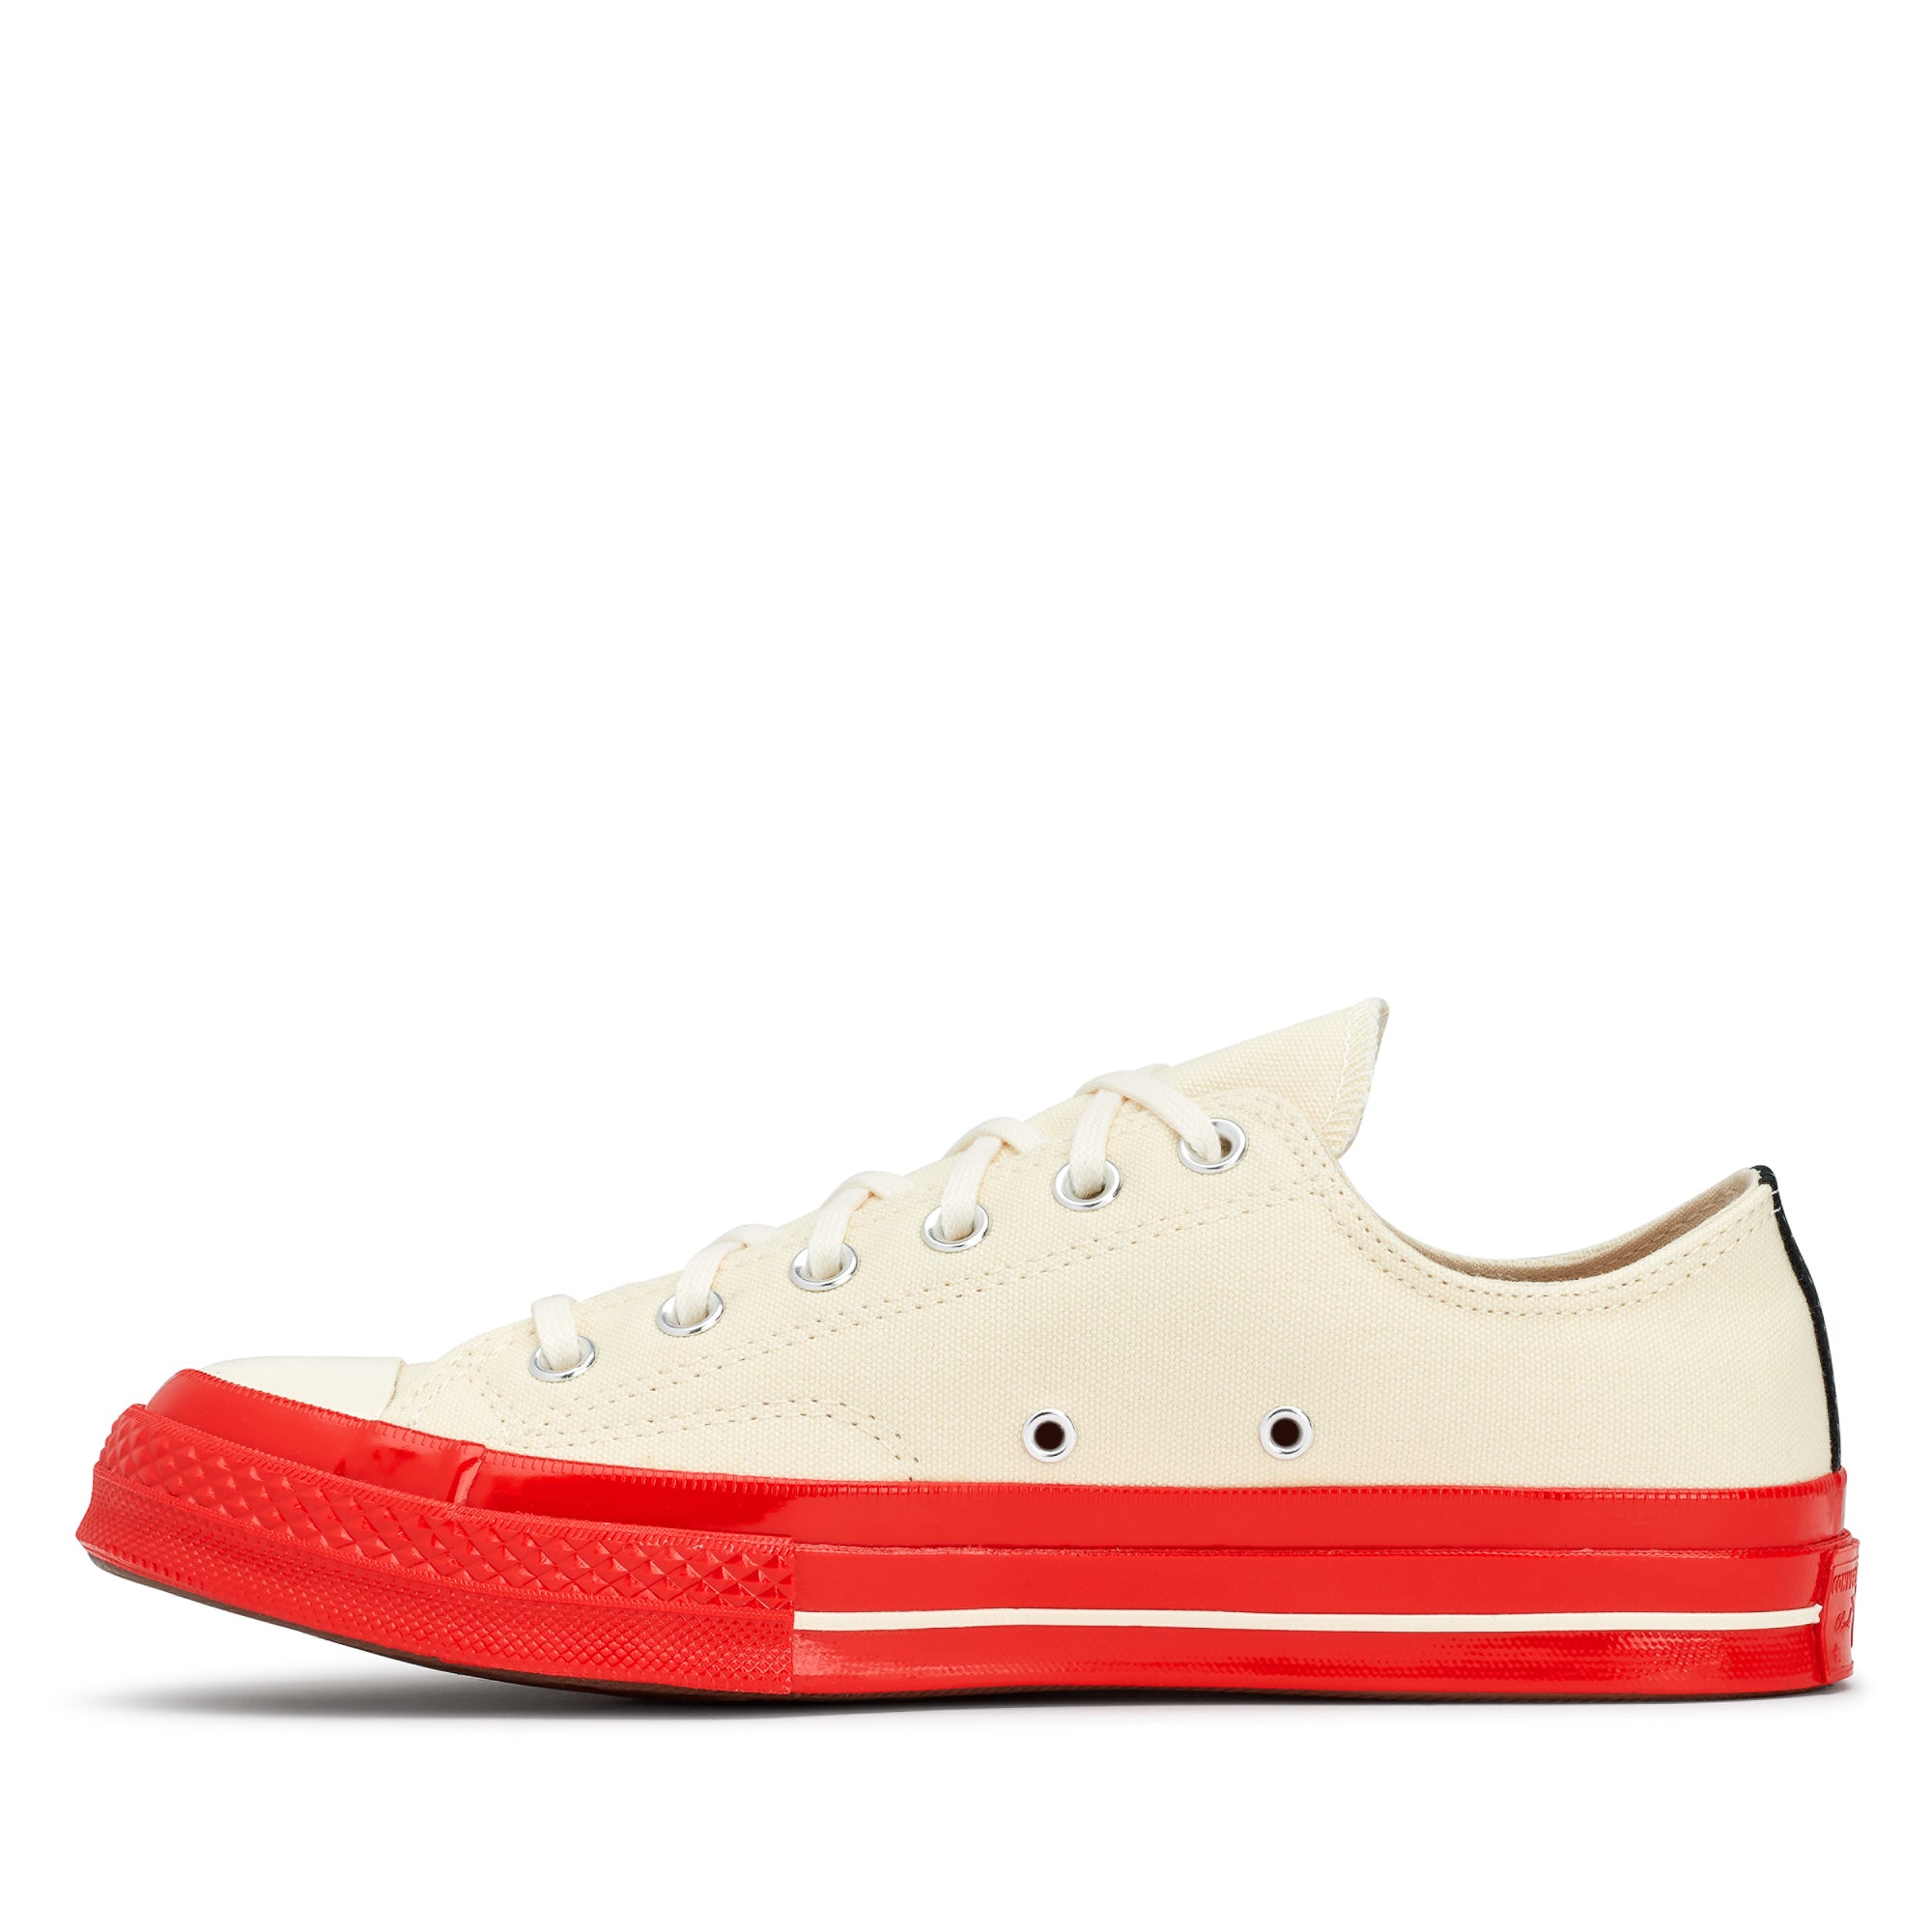 PLAY CONVERSE - Chuck 70 Low Top - (Red/White) view 2